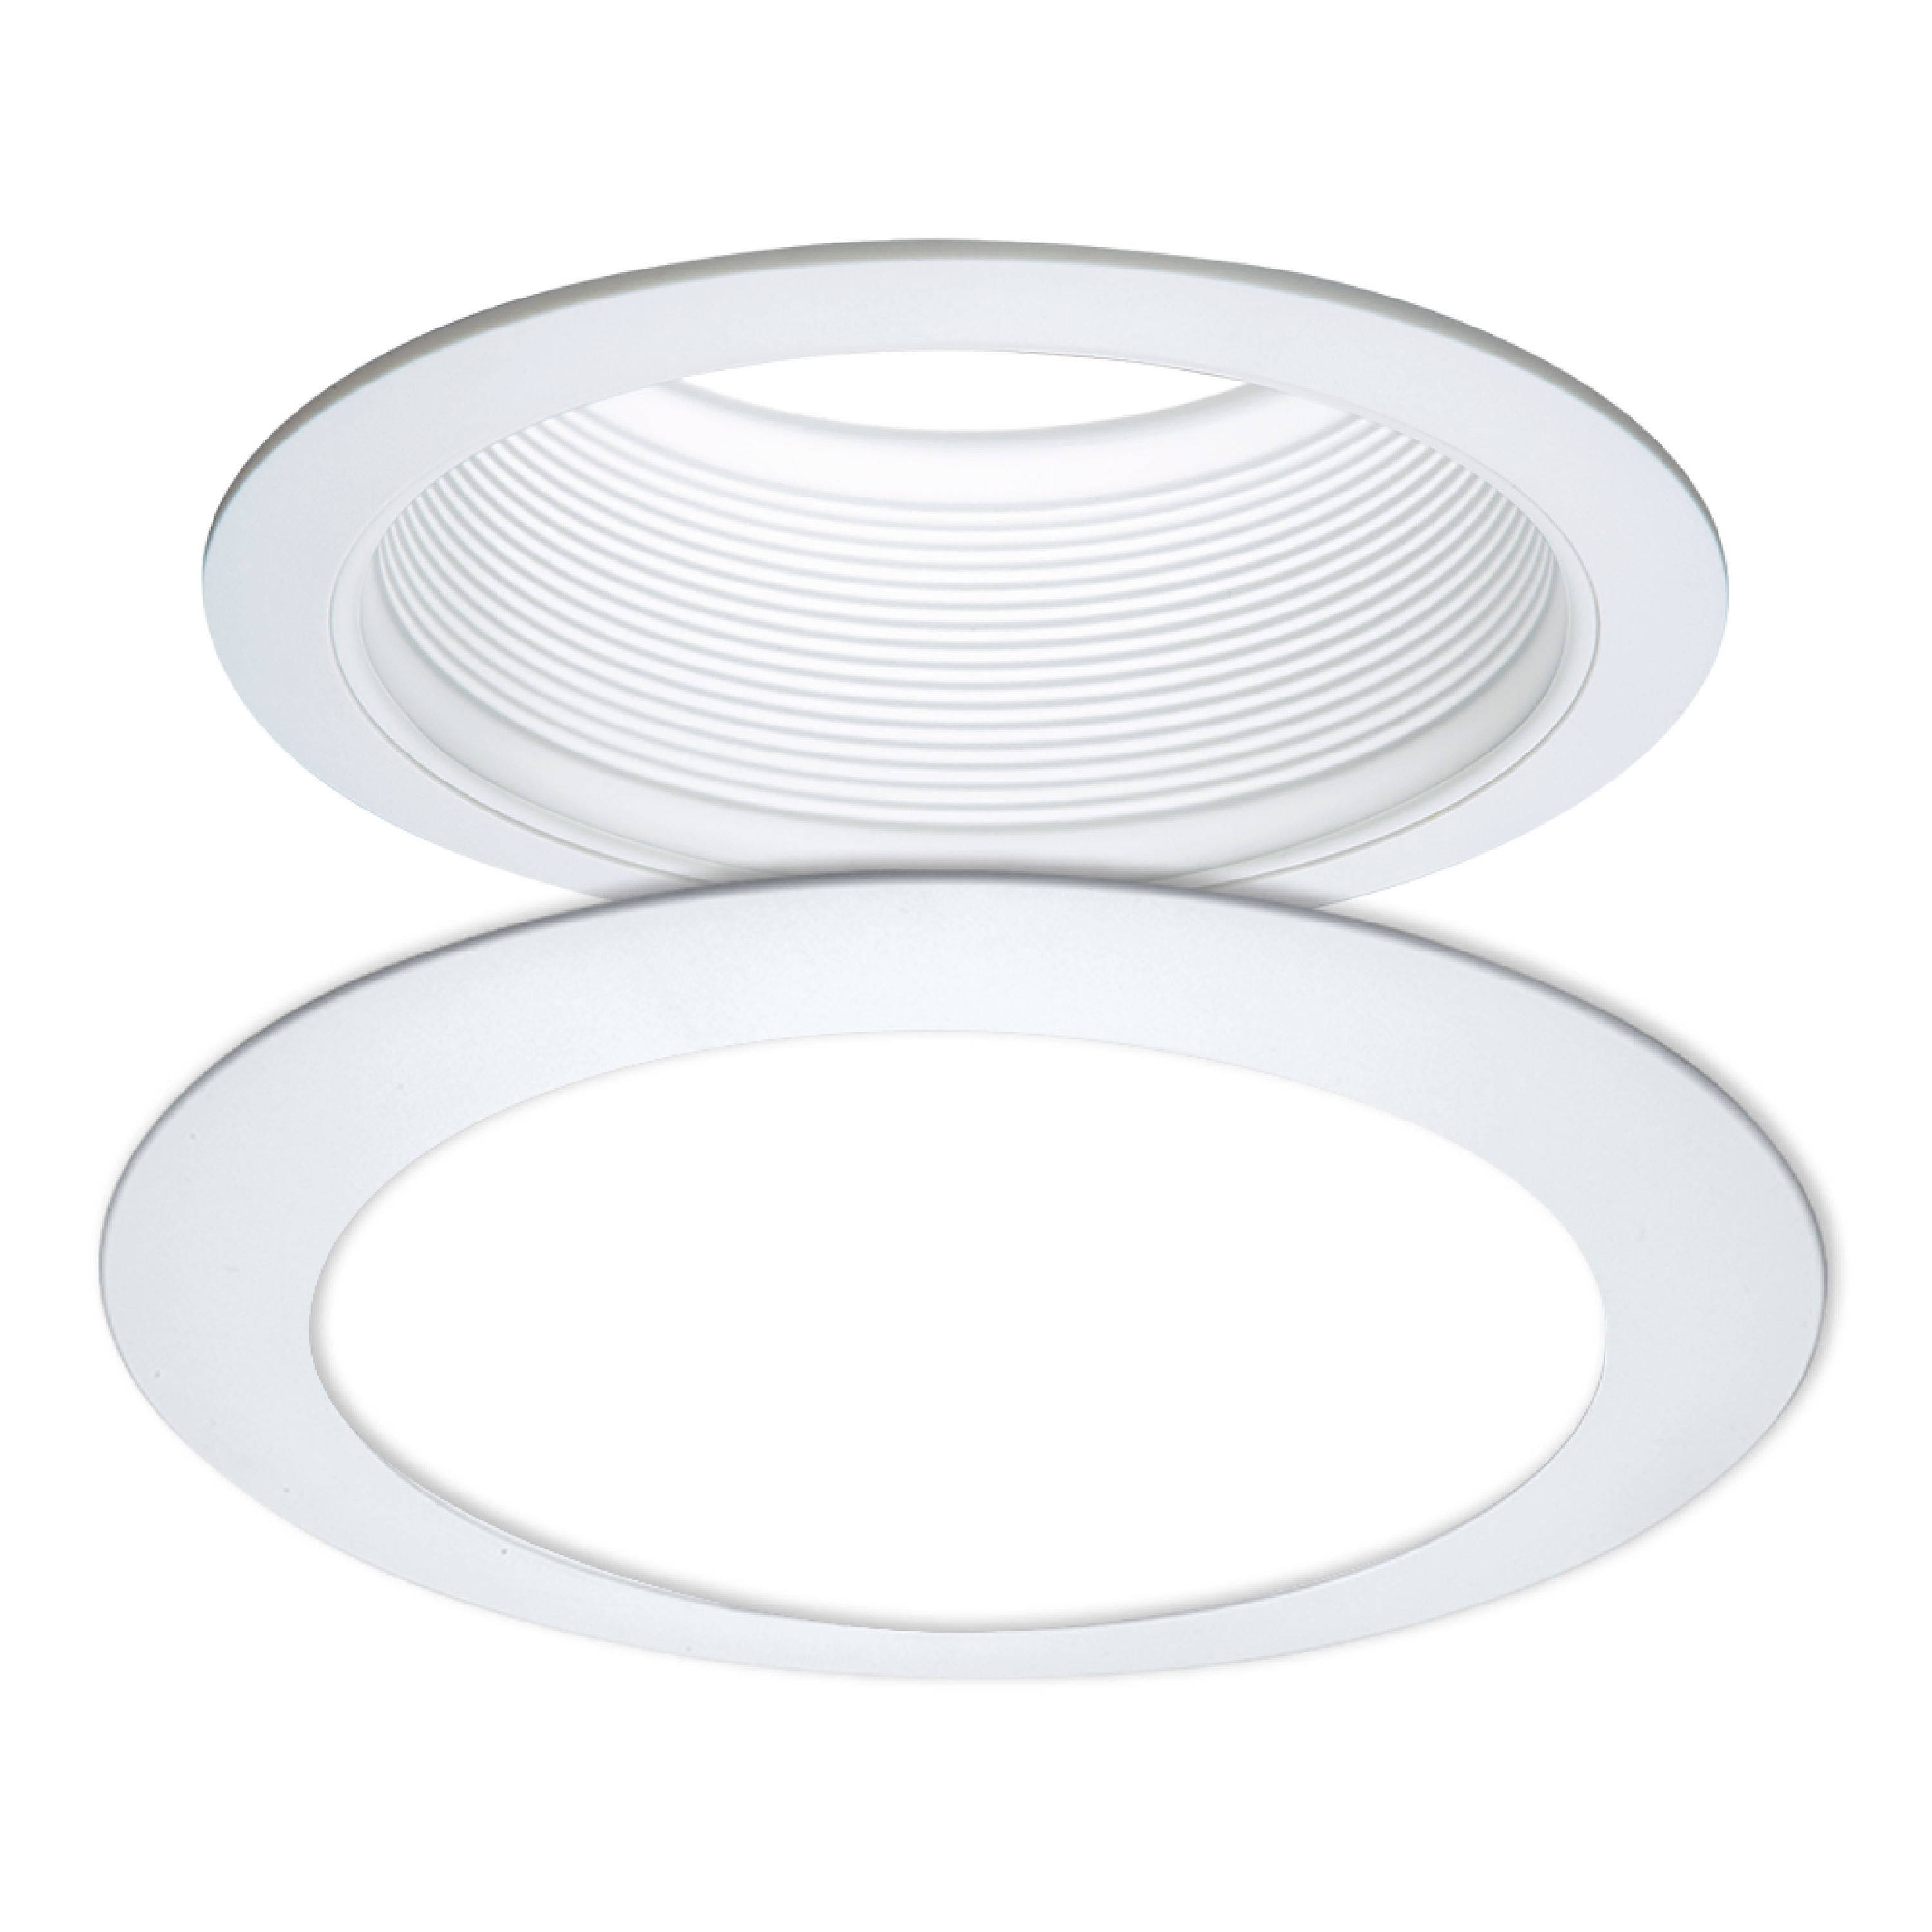 25 Pack White Plastic Trim Ring for 8 Inch Recessed Can Down Light Oversized Lighting Fixture 